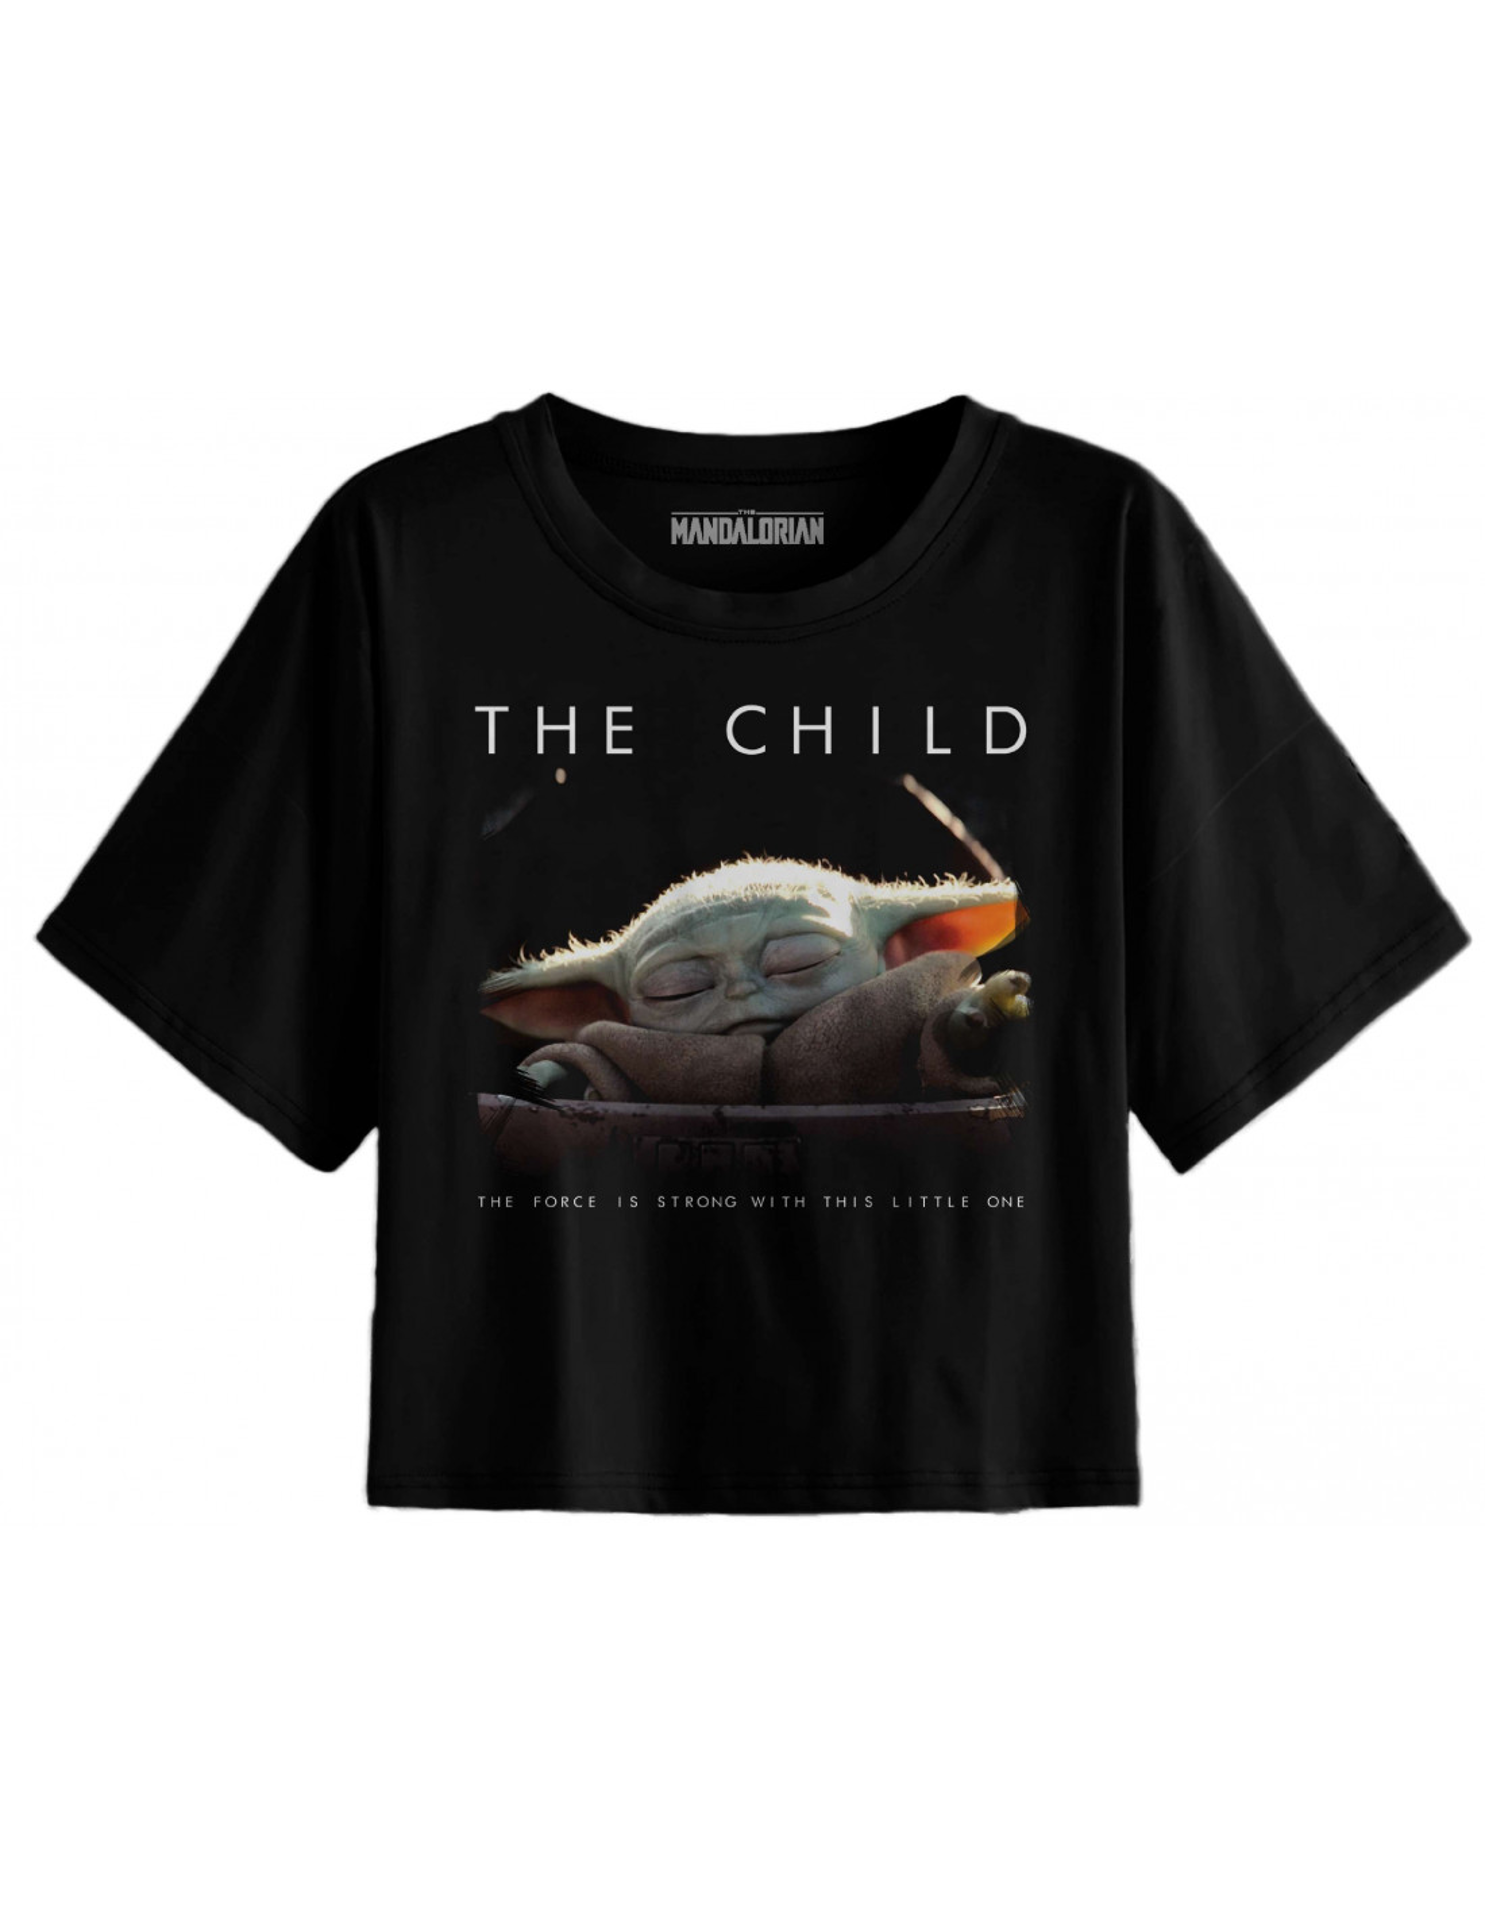 The Mandalorian - T-shirt Noir Femmes Logo The Child "The Force is Strong with this Little One" - M